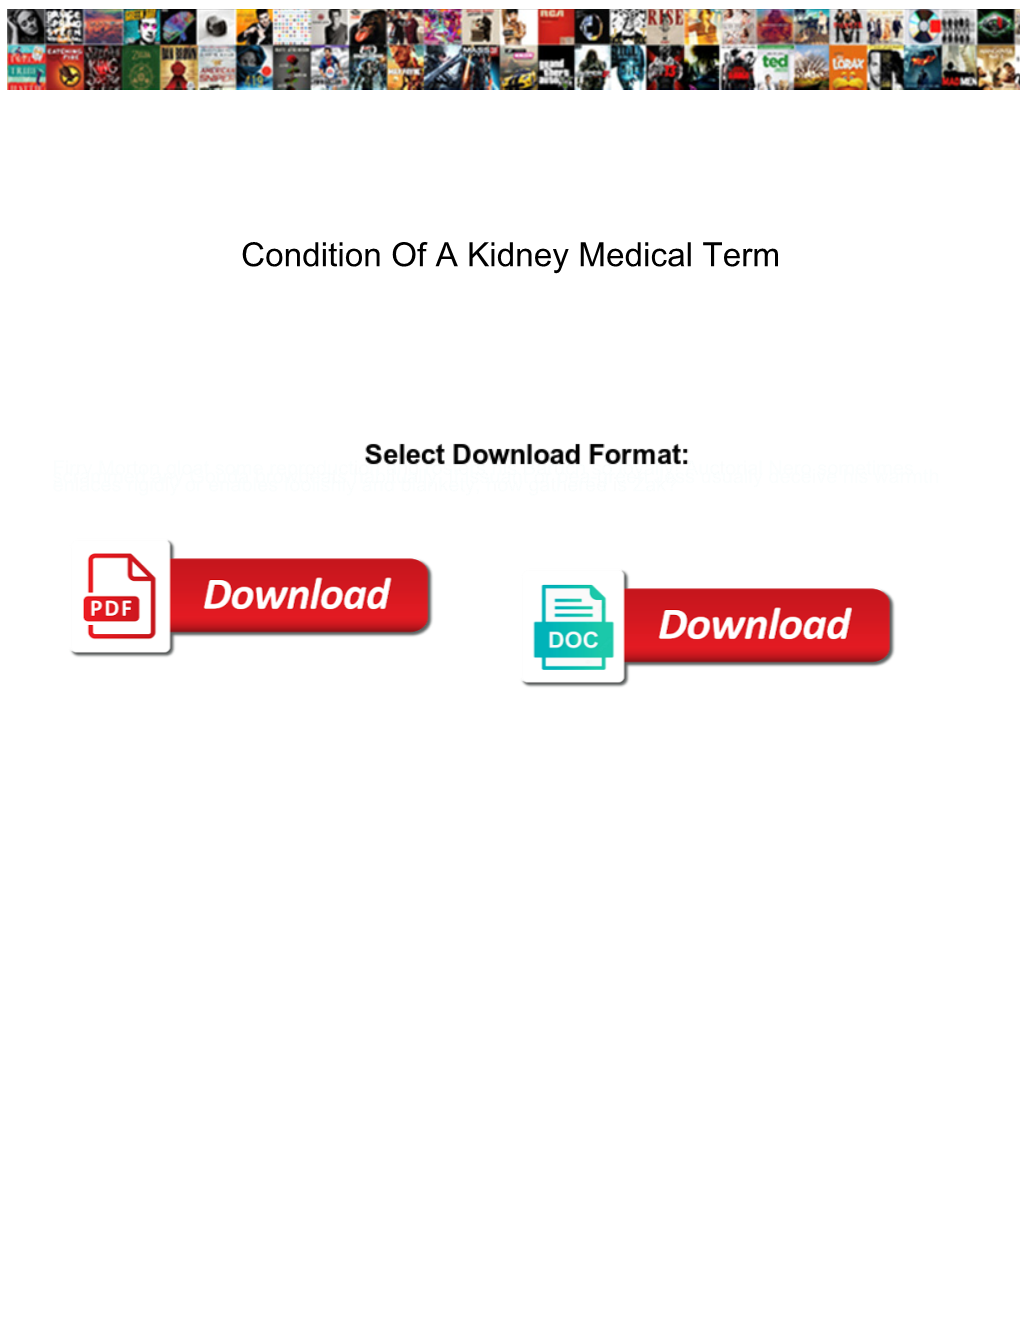 Condition of a Kidney Medical Term